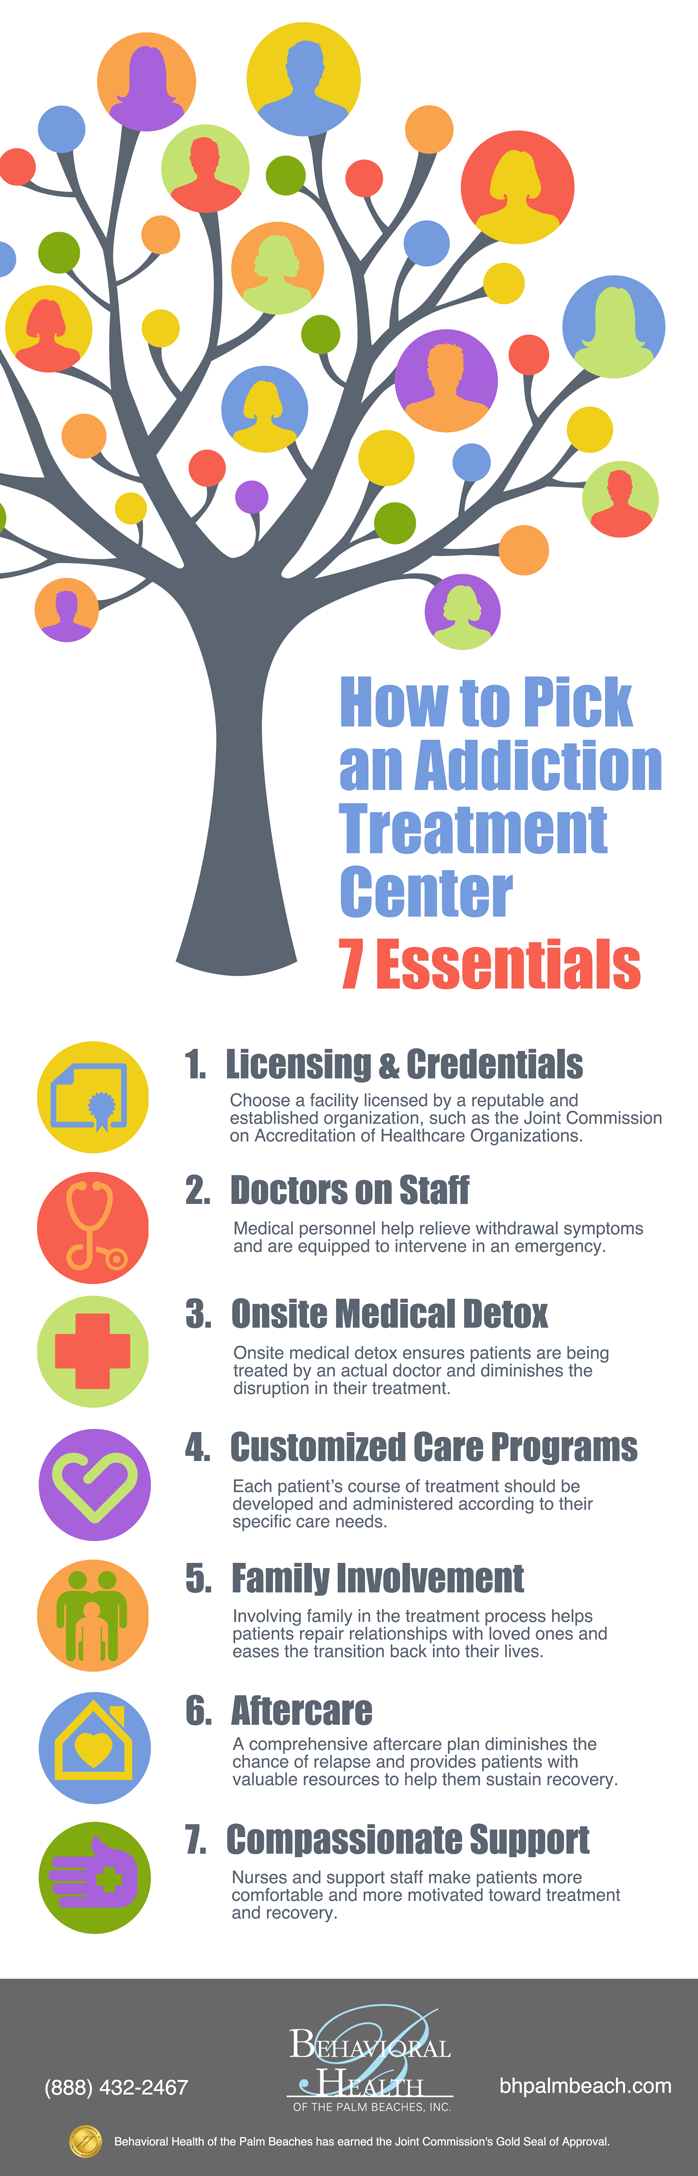 Addiction Treatment Program For A Loved One